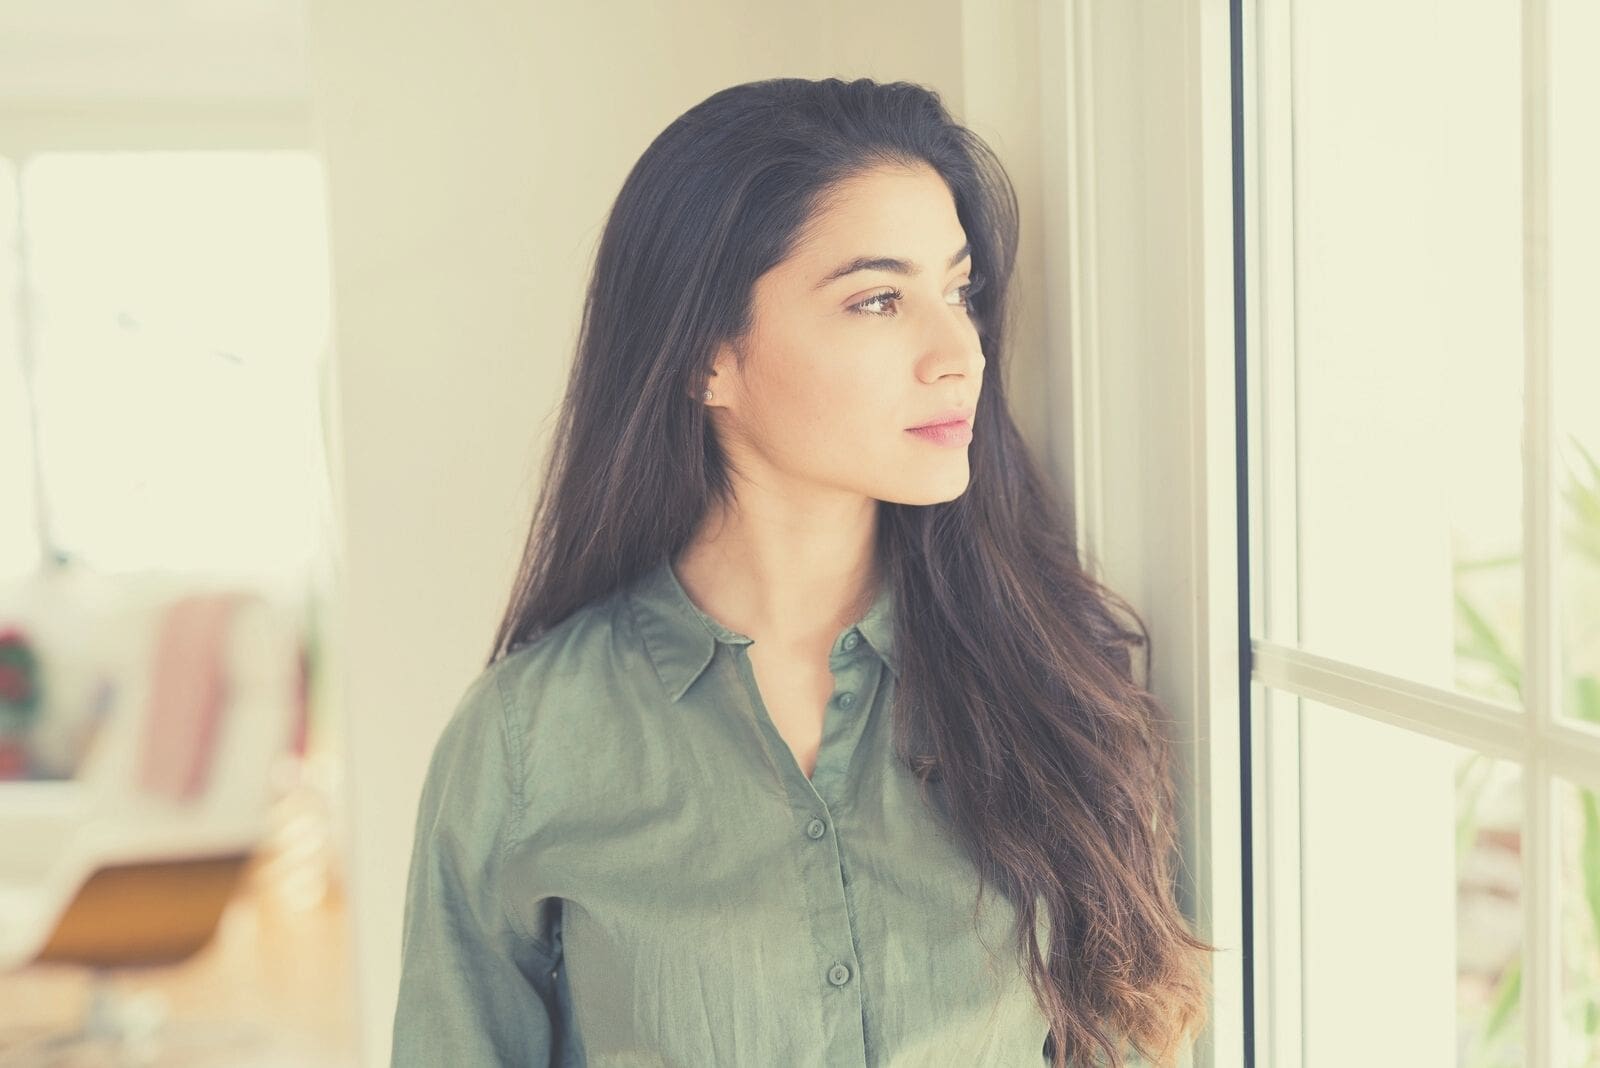 young woman leaning on the wall near the windows while looking outside